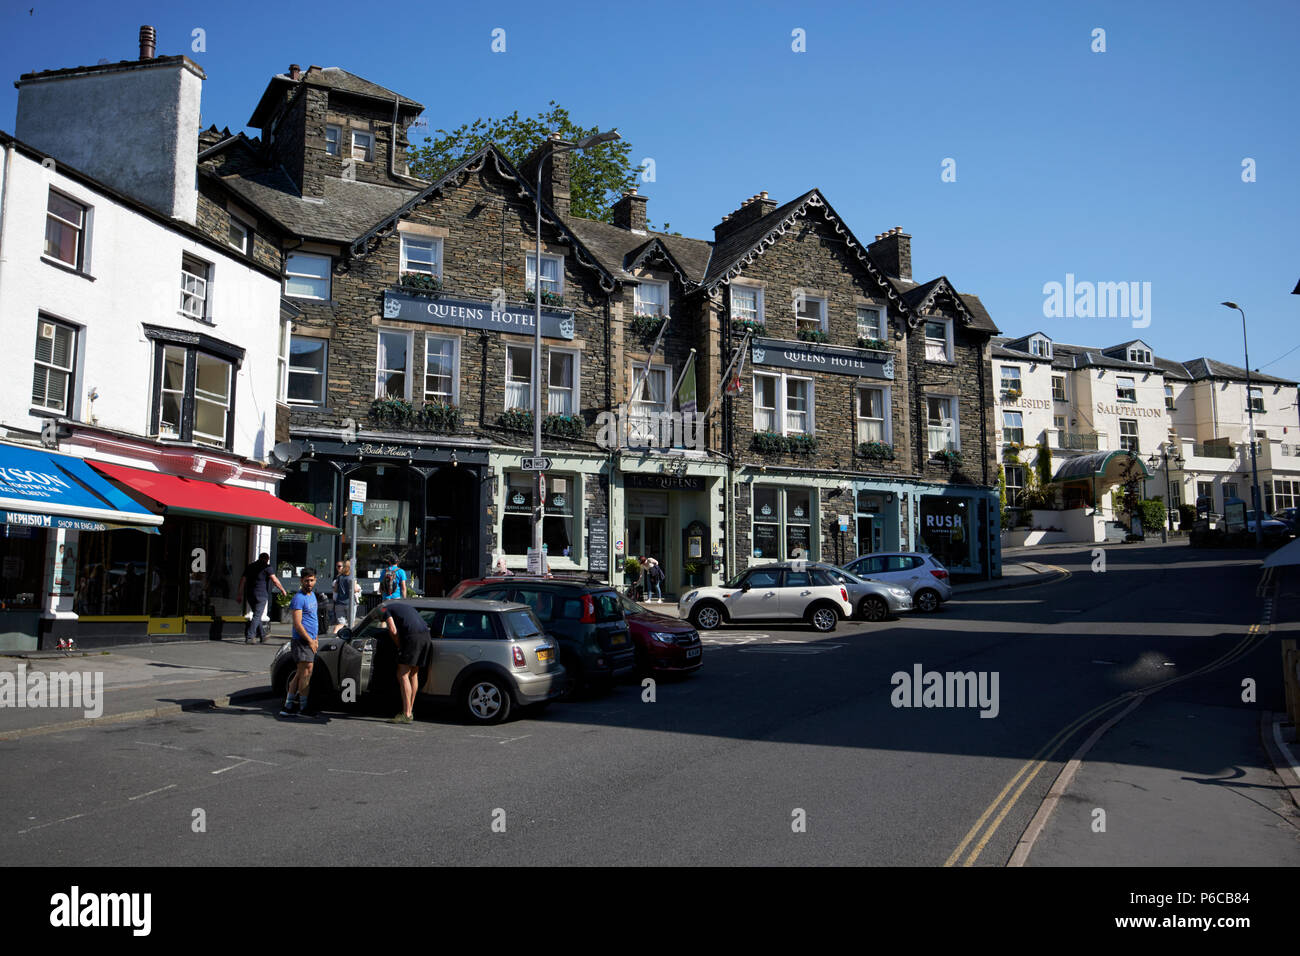 Queens hotel and shops in market place in the centre of Ambleside lake district cumbria england uk Stock Photo